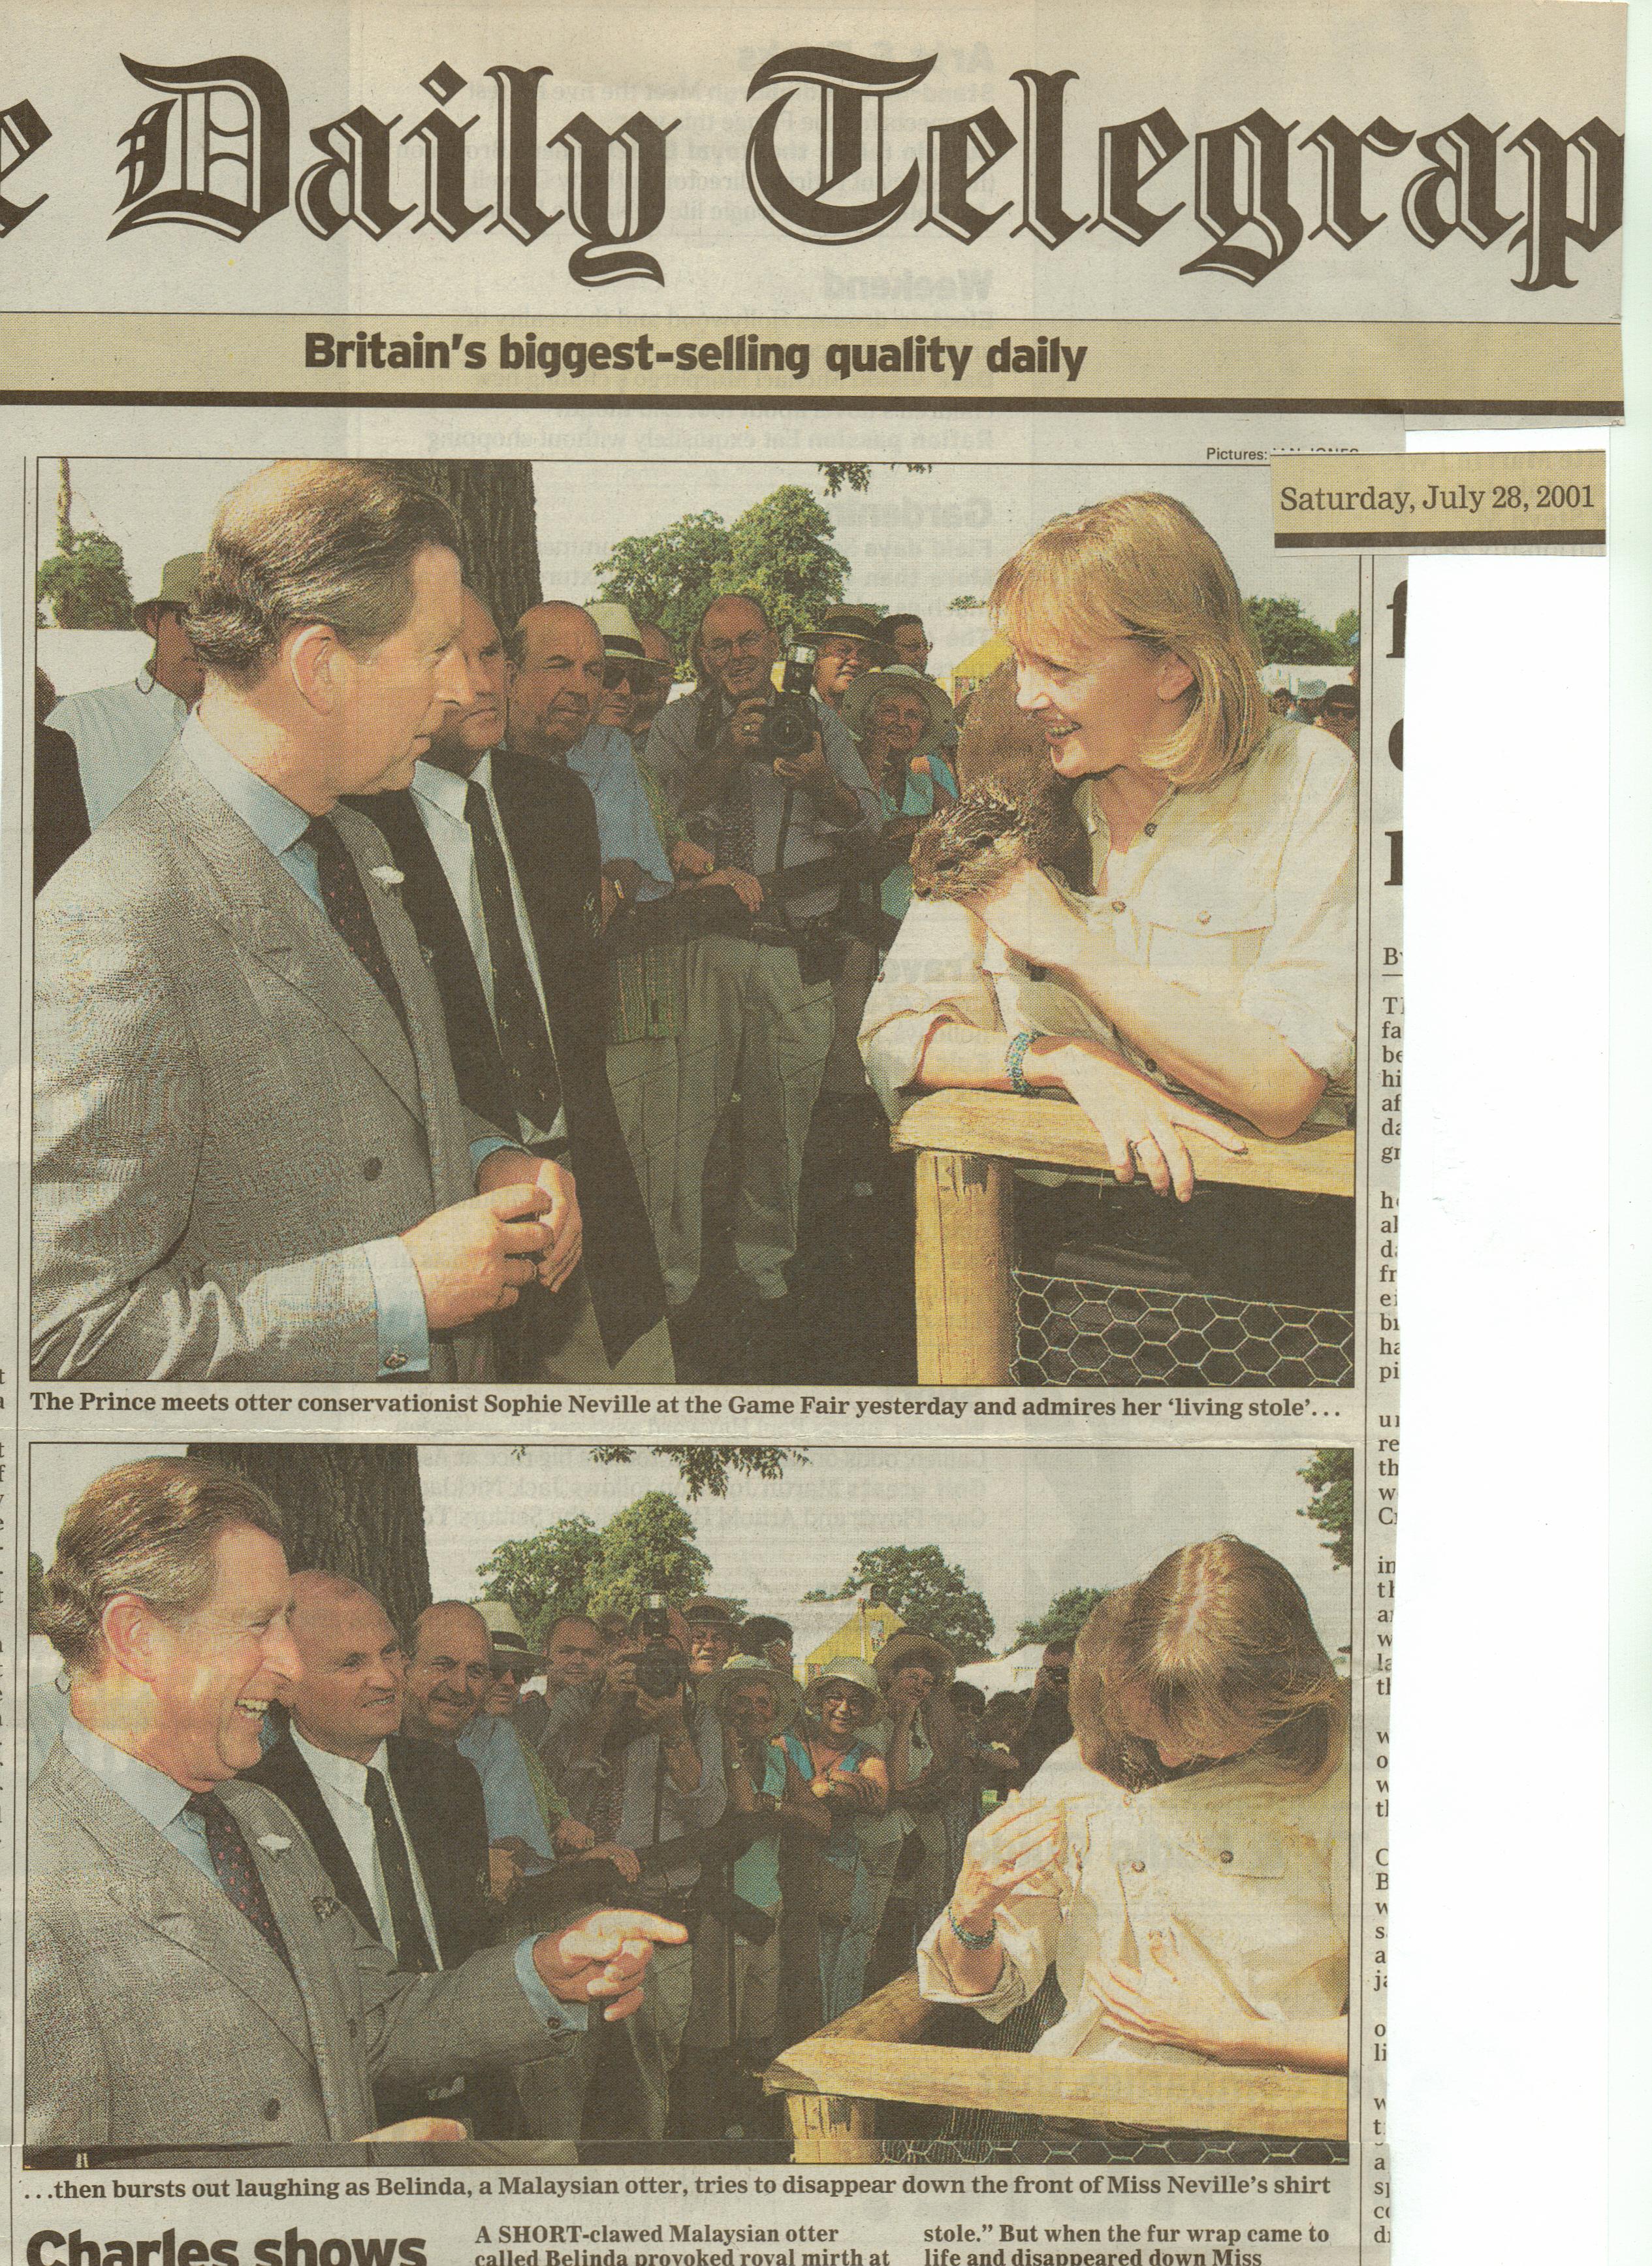 Sophie Neville appearing on the front of The Daily Telegraph with the Prince of Wales and her tame otter